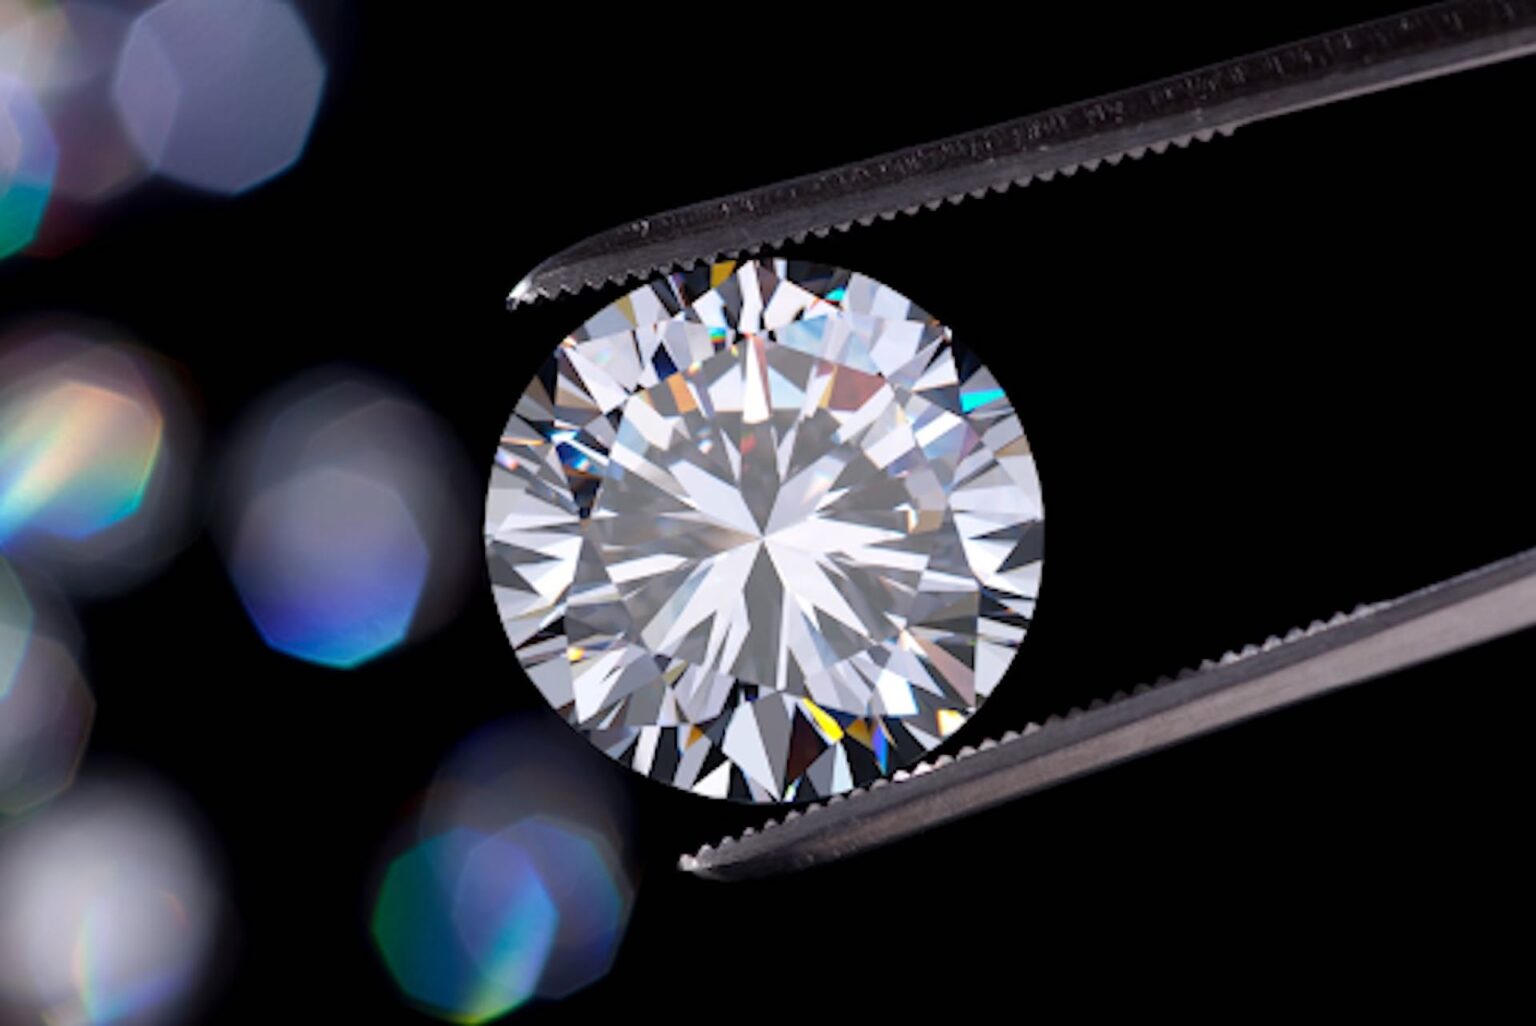 Diamonds are a girl's best friend, right? But what are the things you should know before buying a diamond? Discover it here.